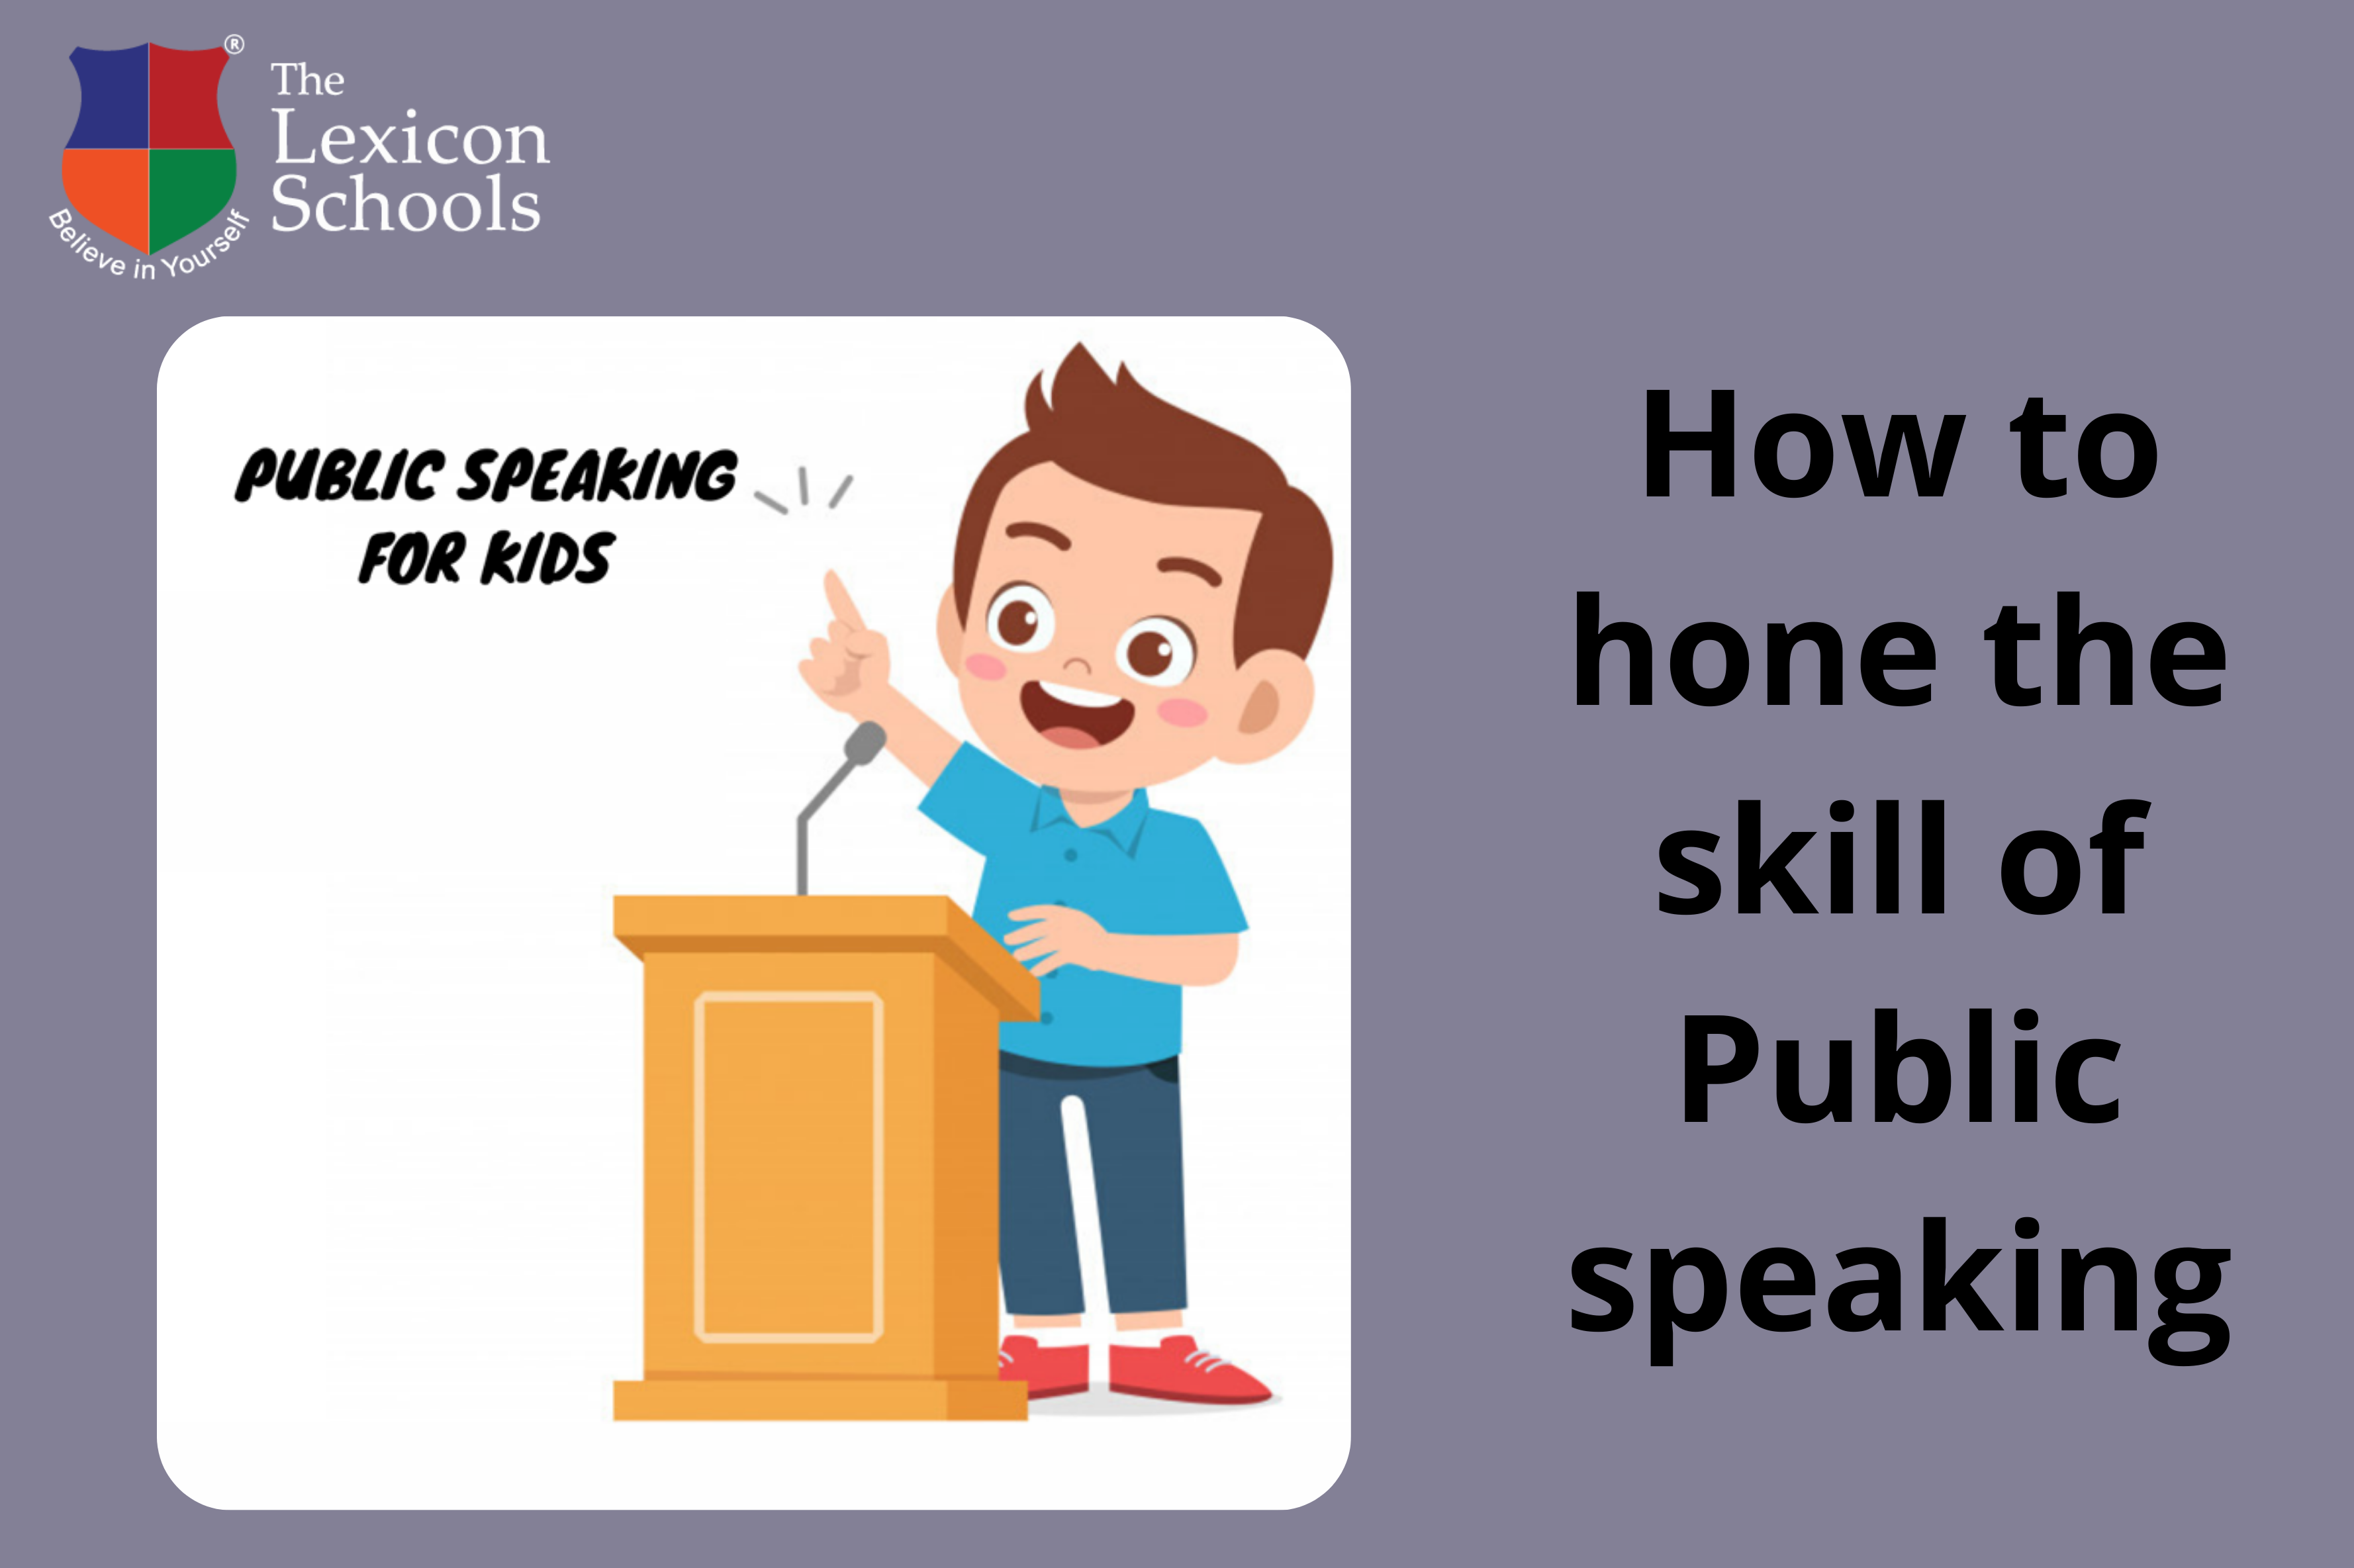 HOW TO HONE THE SKILL OF PUBLIC SPEAKING